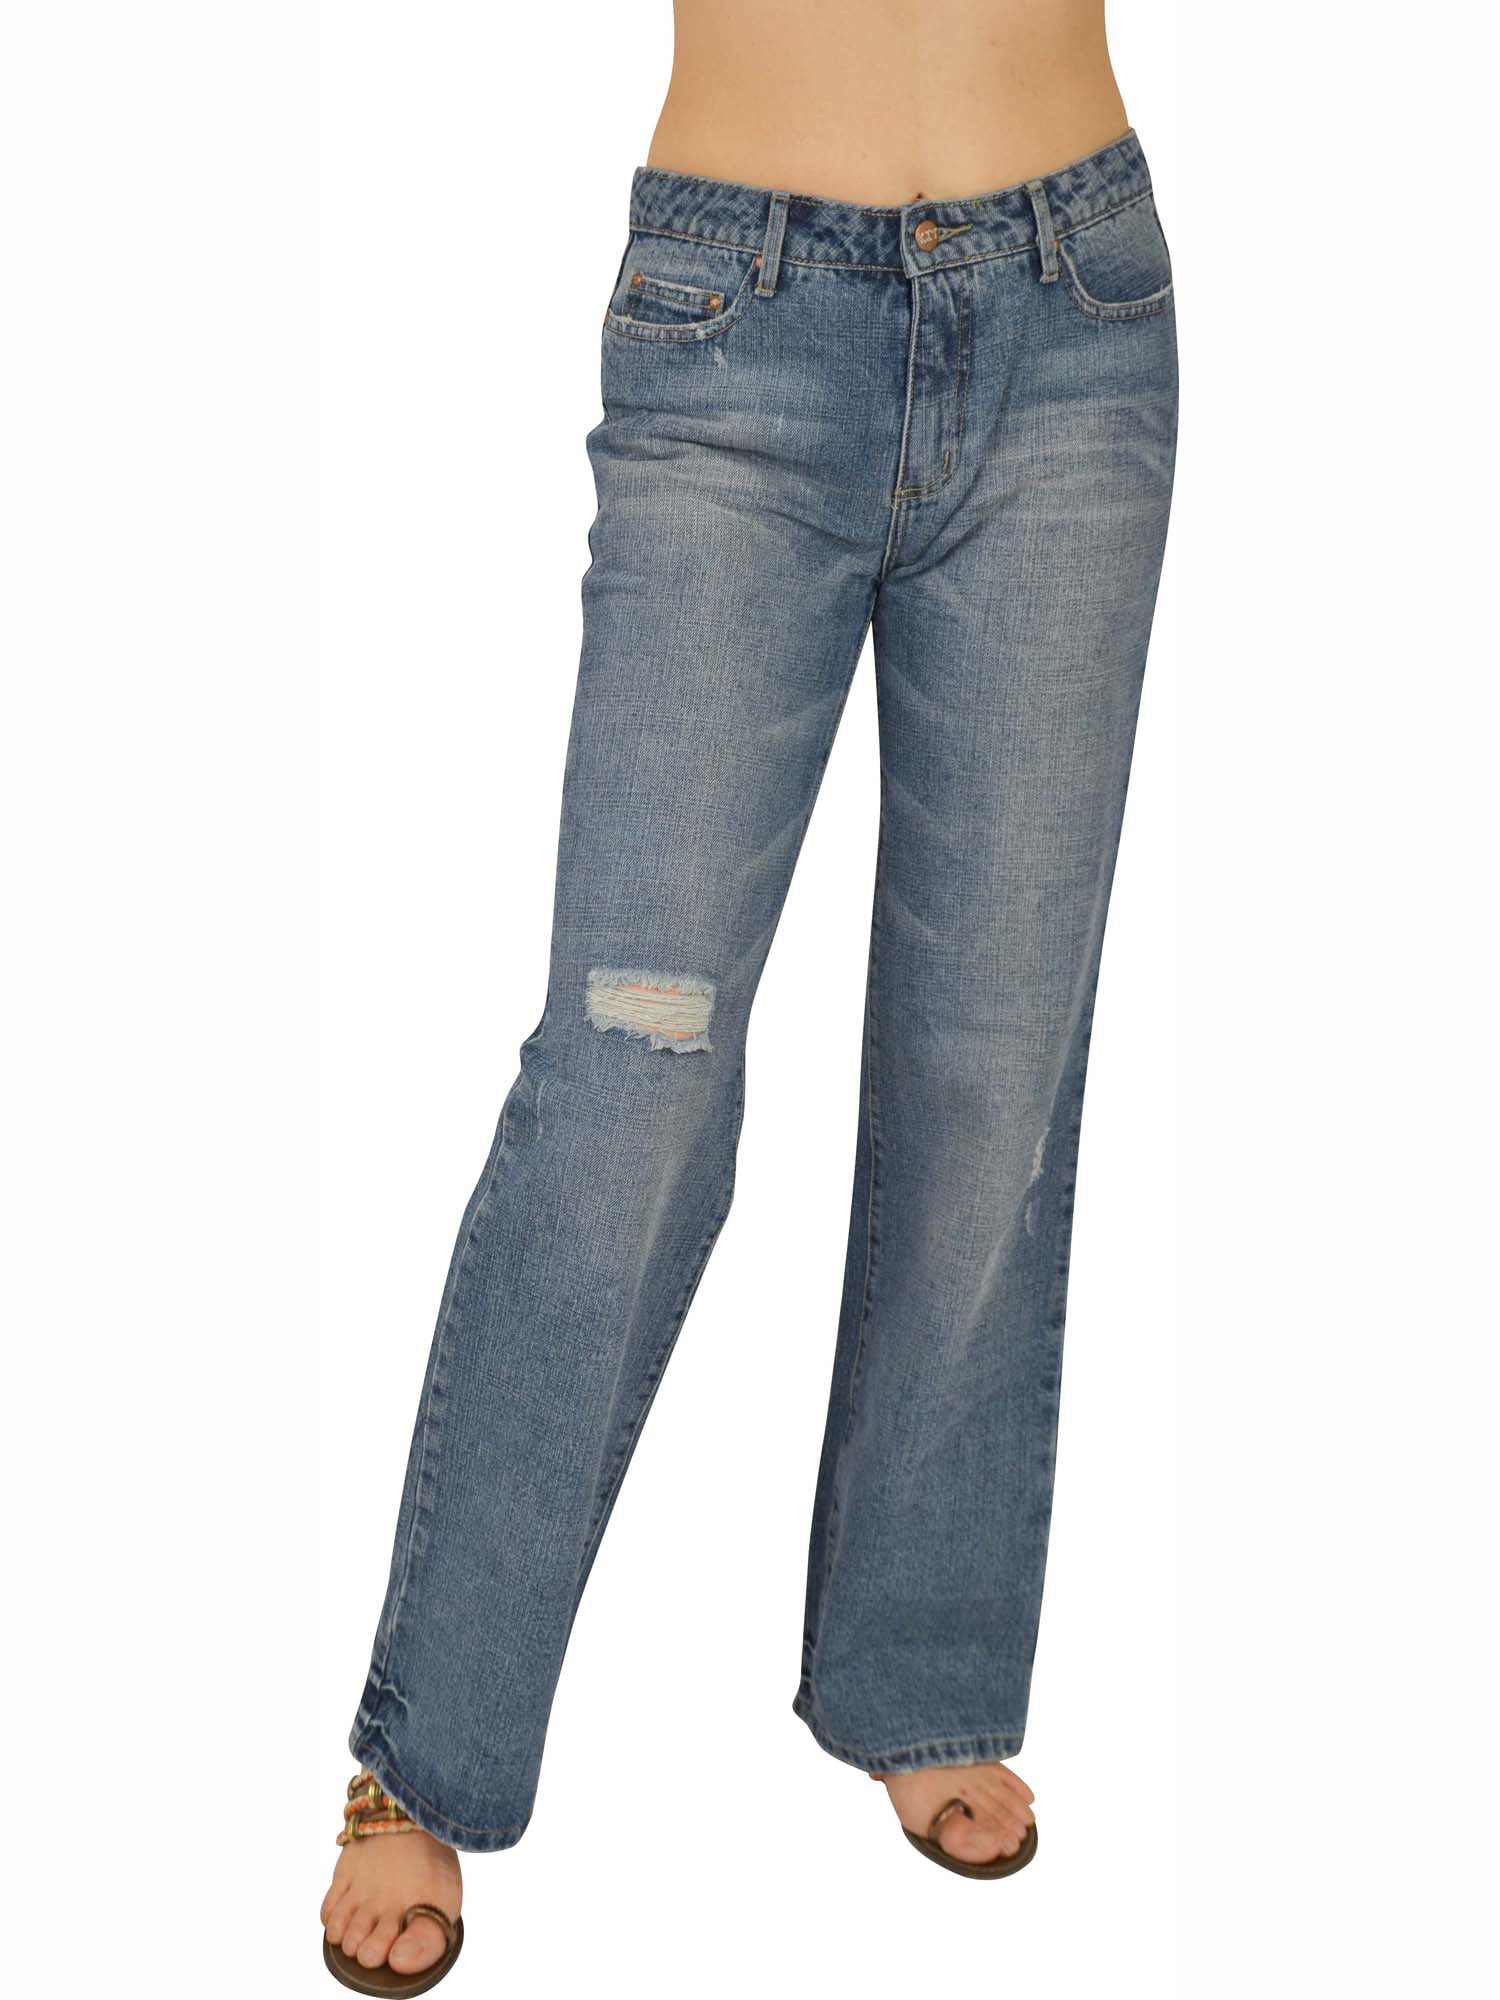 h&m shaping jeans